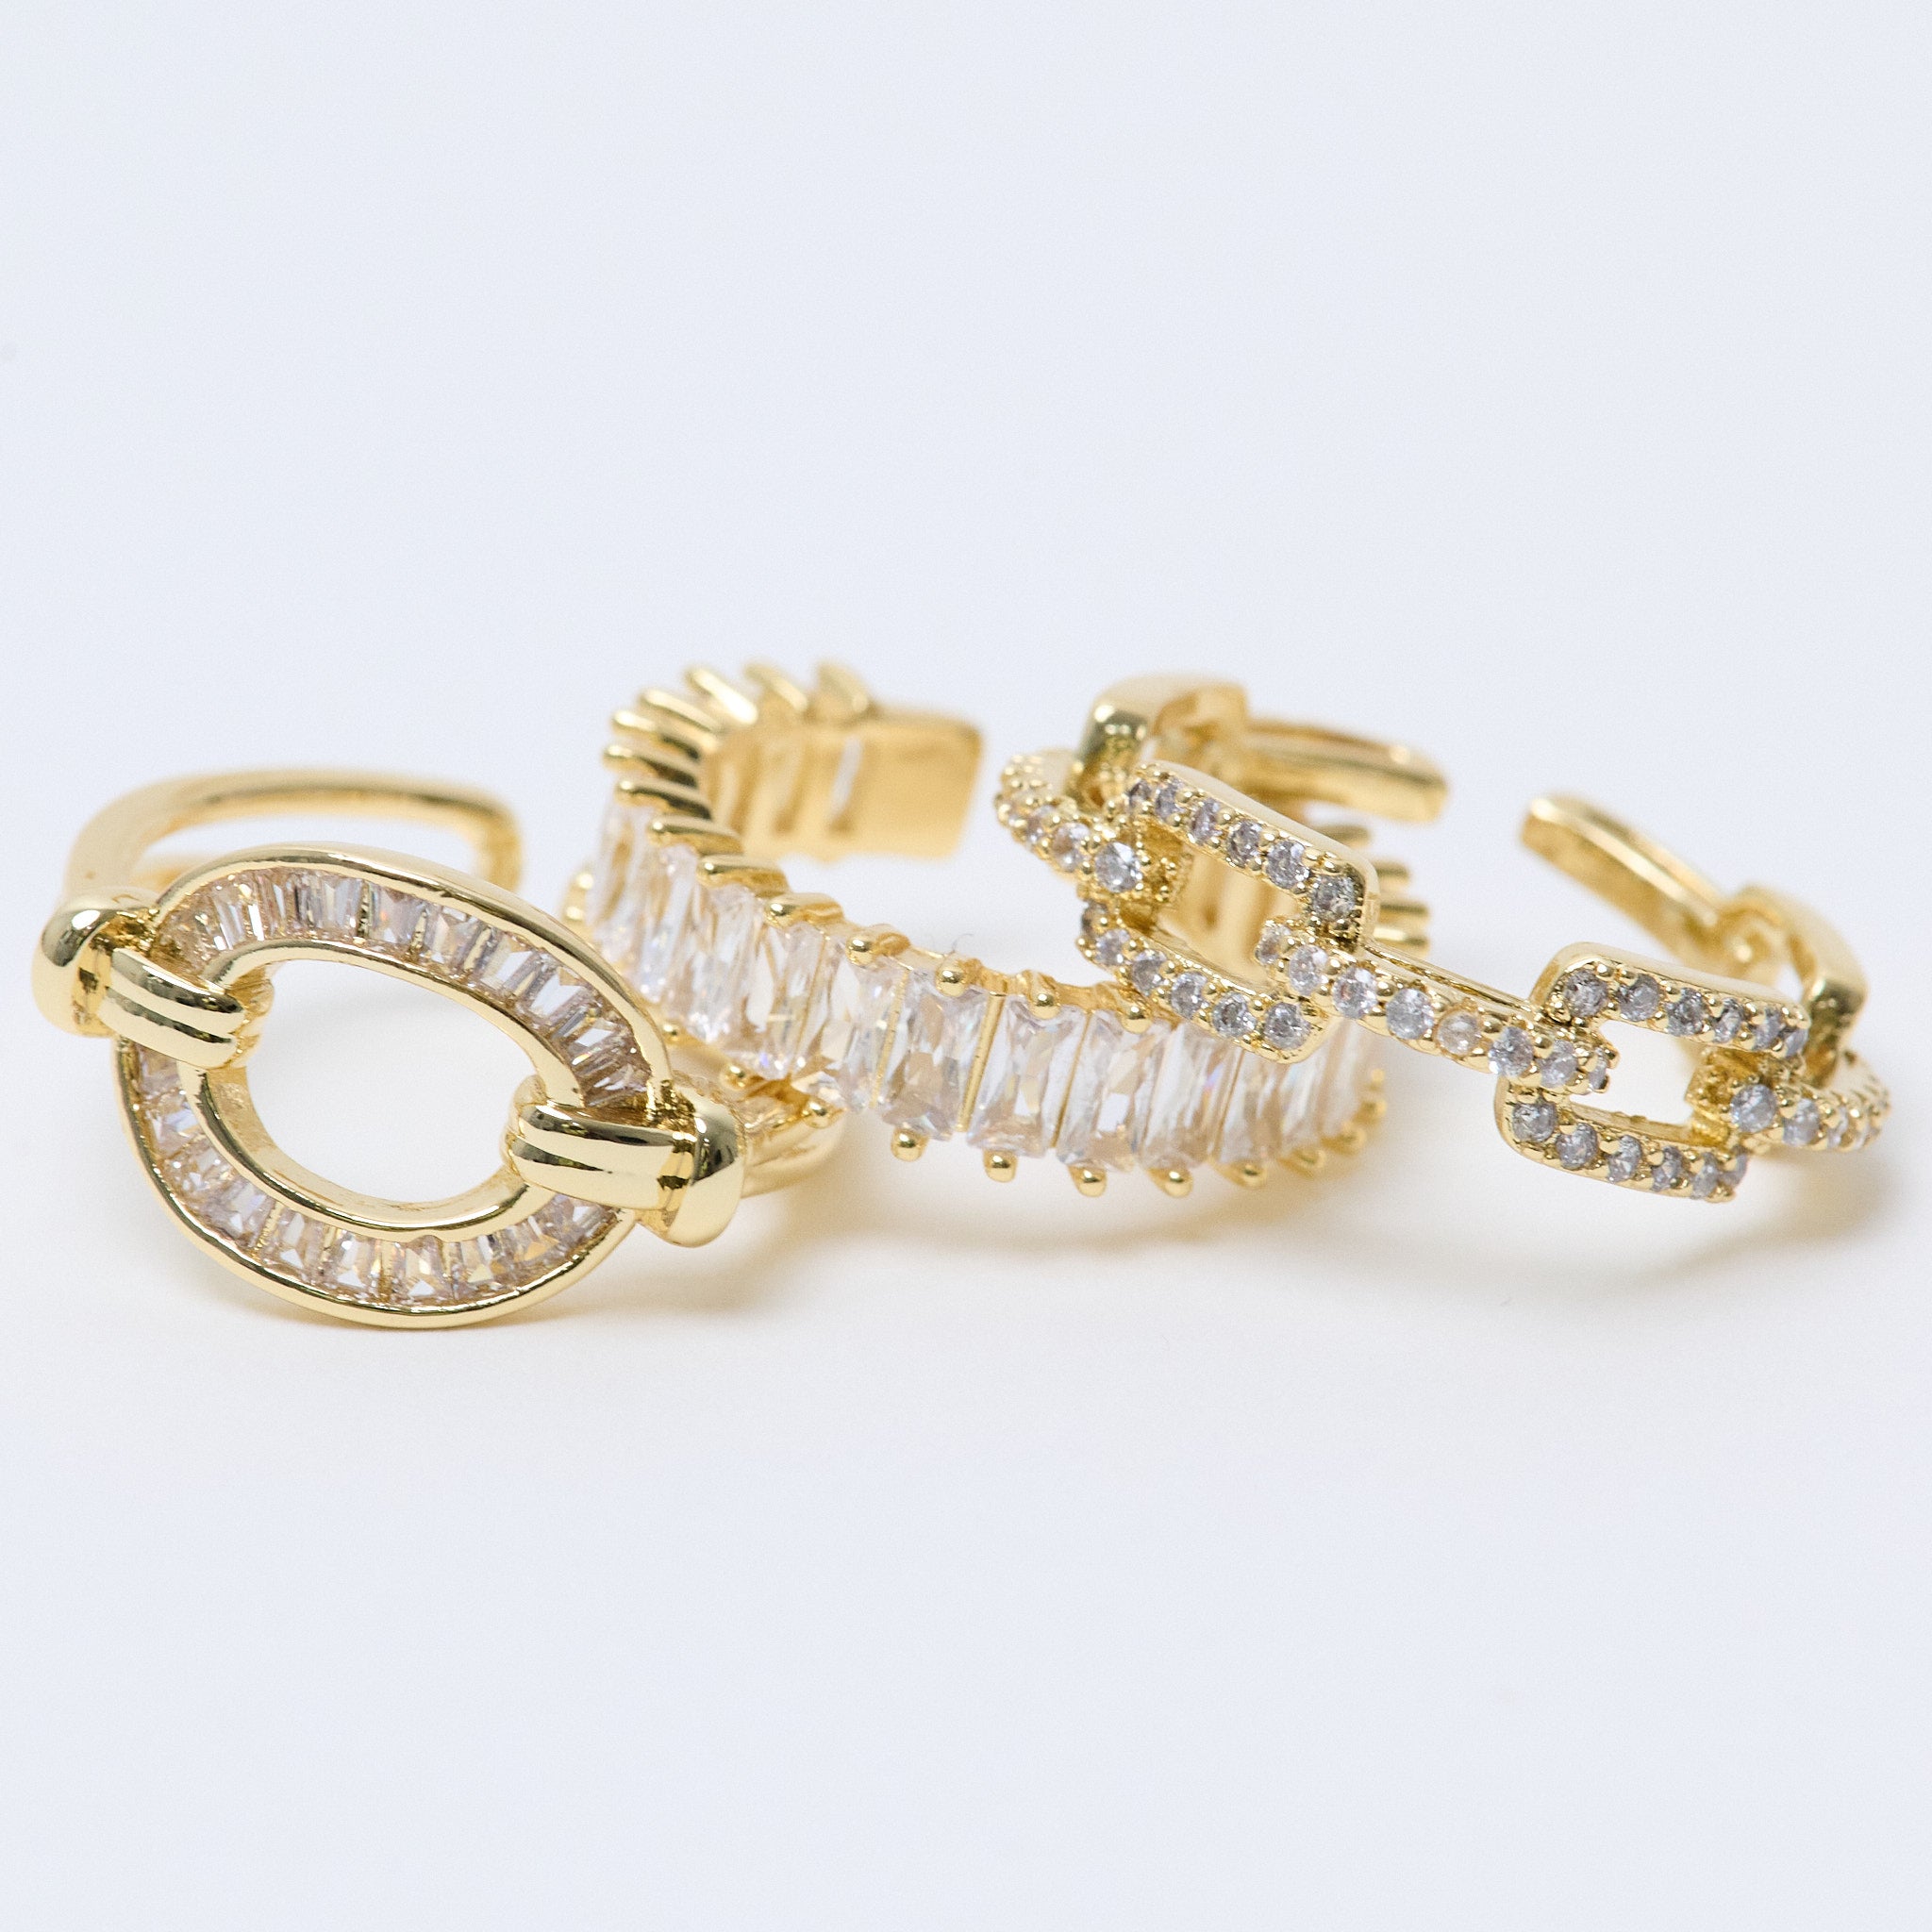 Diamond rings styles to choose from 18k adjustable